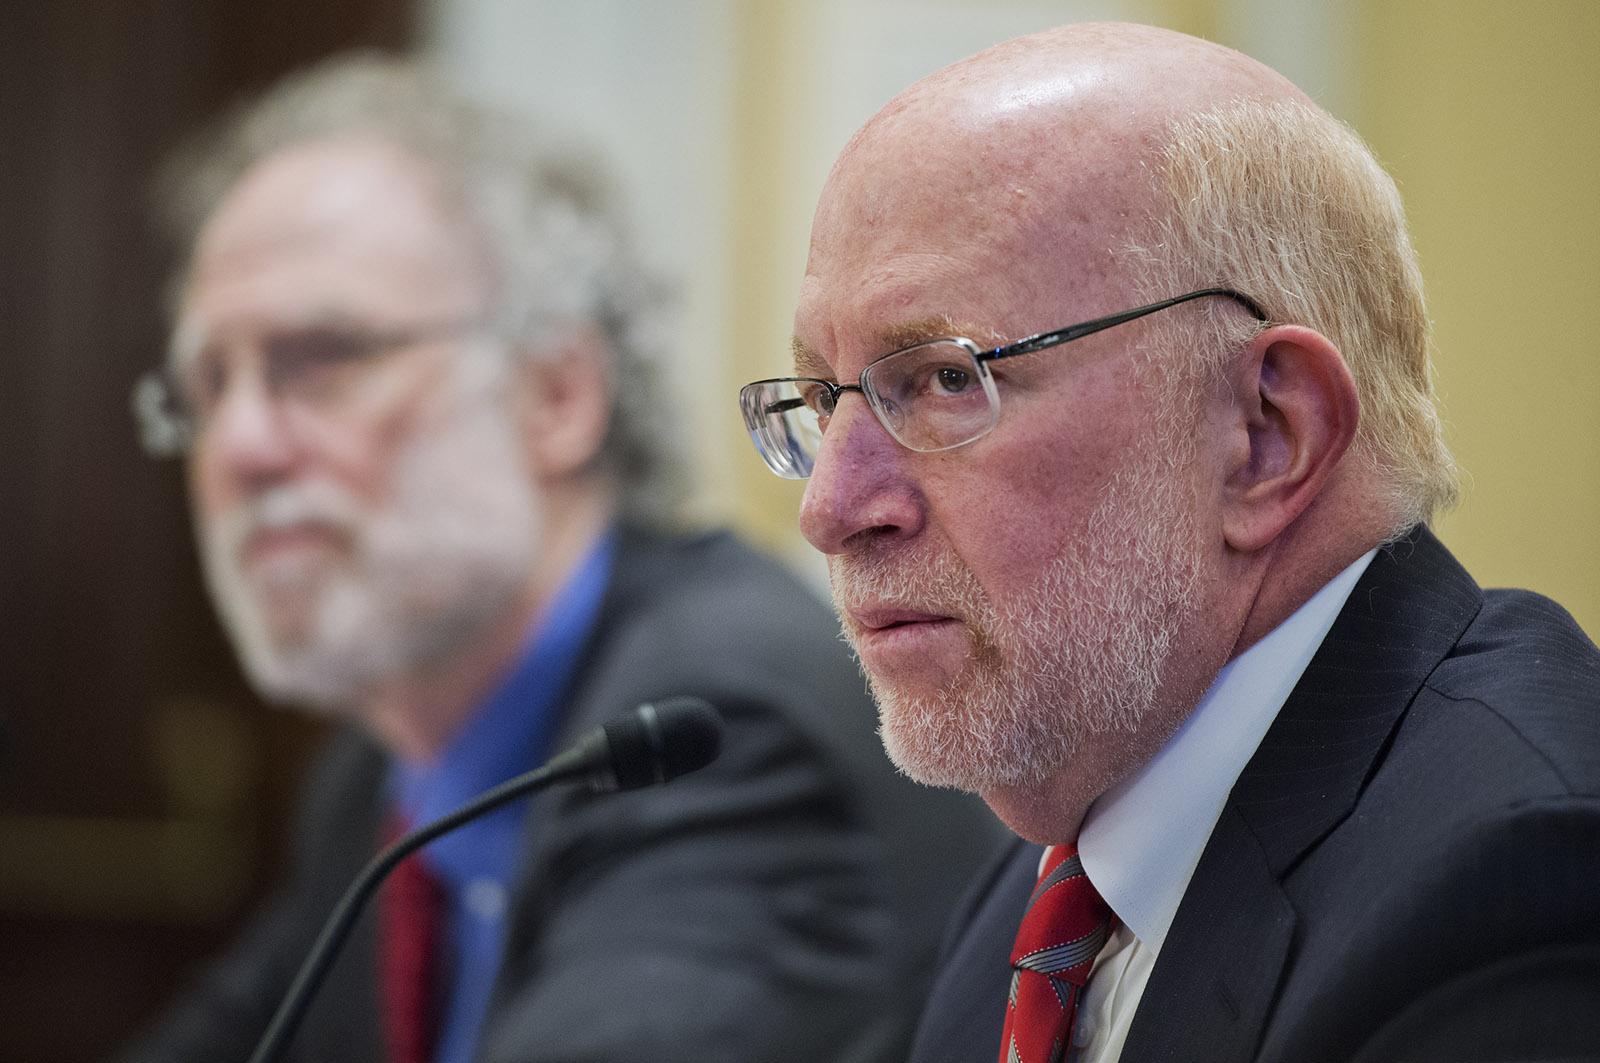 Benjamin Ginsberg, right, prepares to testify before a Senate Rules and Administration Committee hearing in Russell Building titled "Bipartisan Support for Improving U.S. Elections: An Overview from the Presidential Commission on Election Administration," on February 12, 2014.